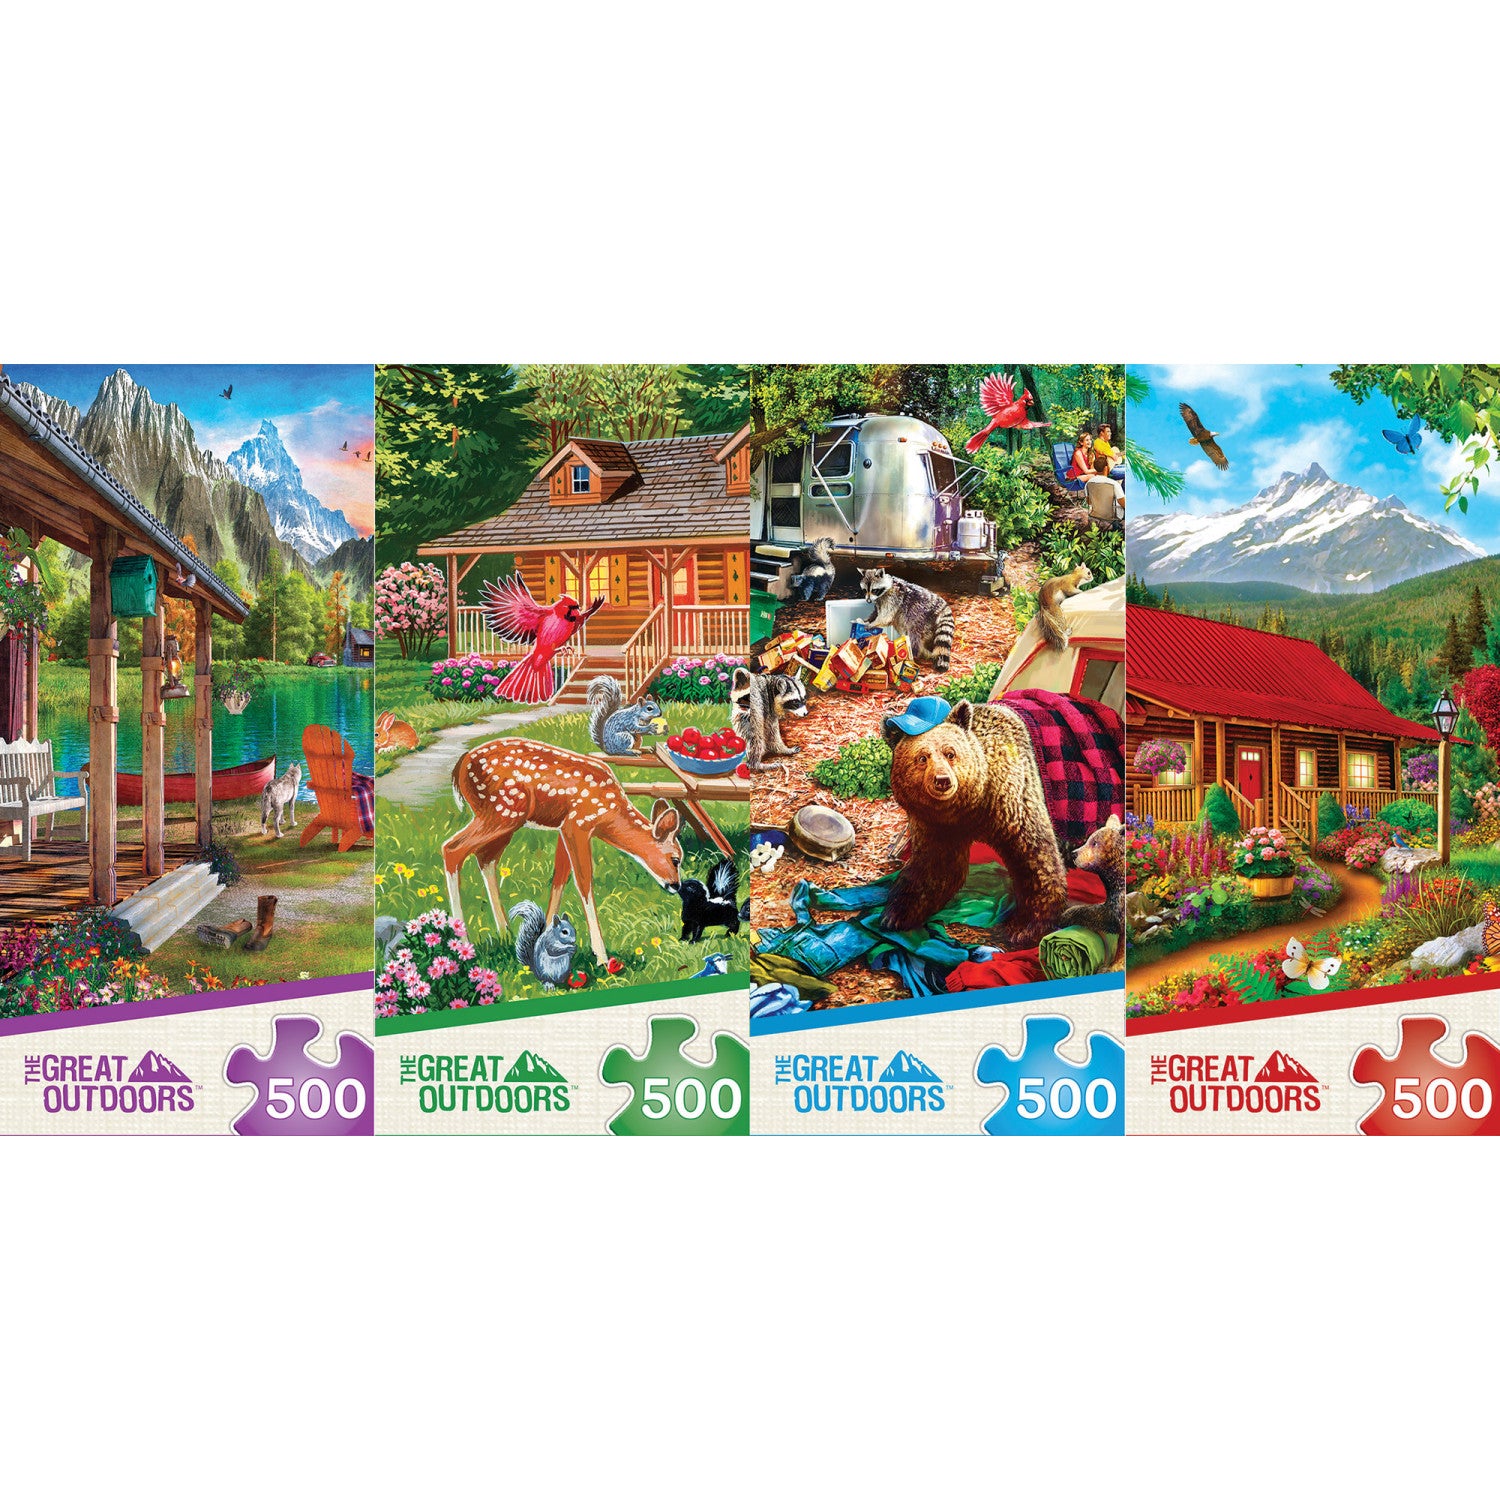 Space Savers - Great Outdoors 4-Pack 500 Piece Jigsaw Puzzle Assortment